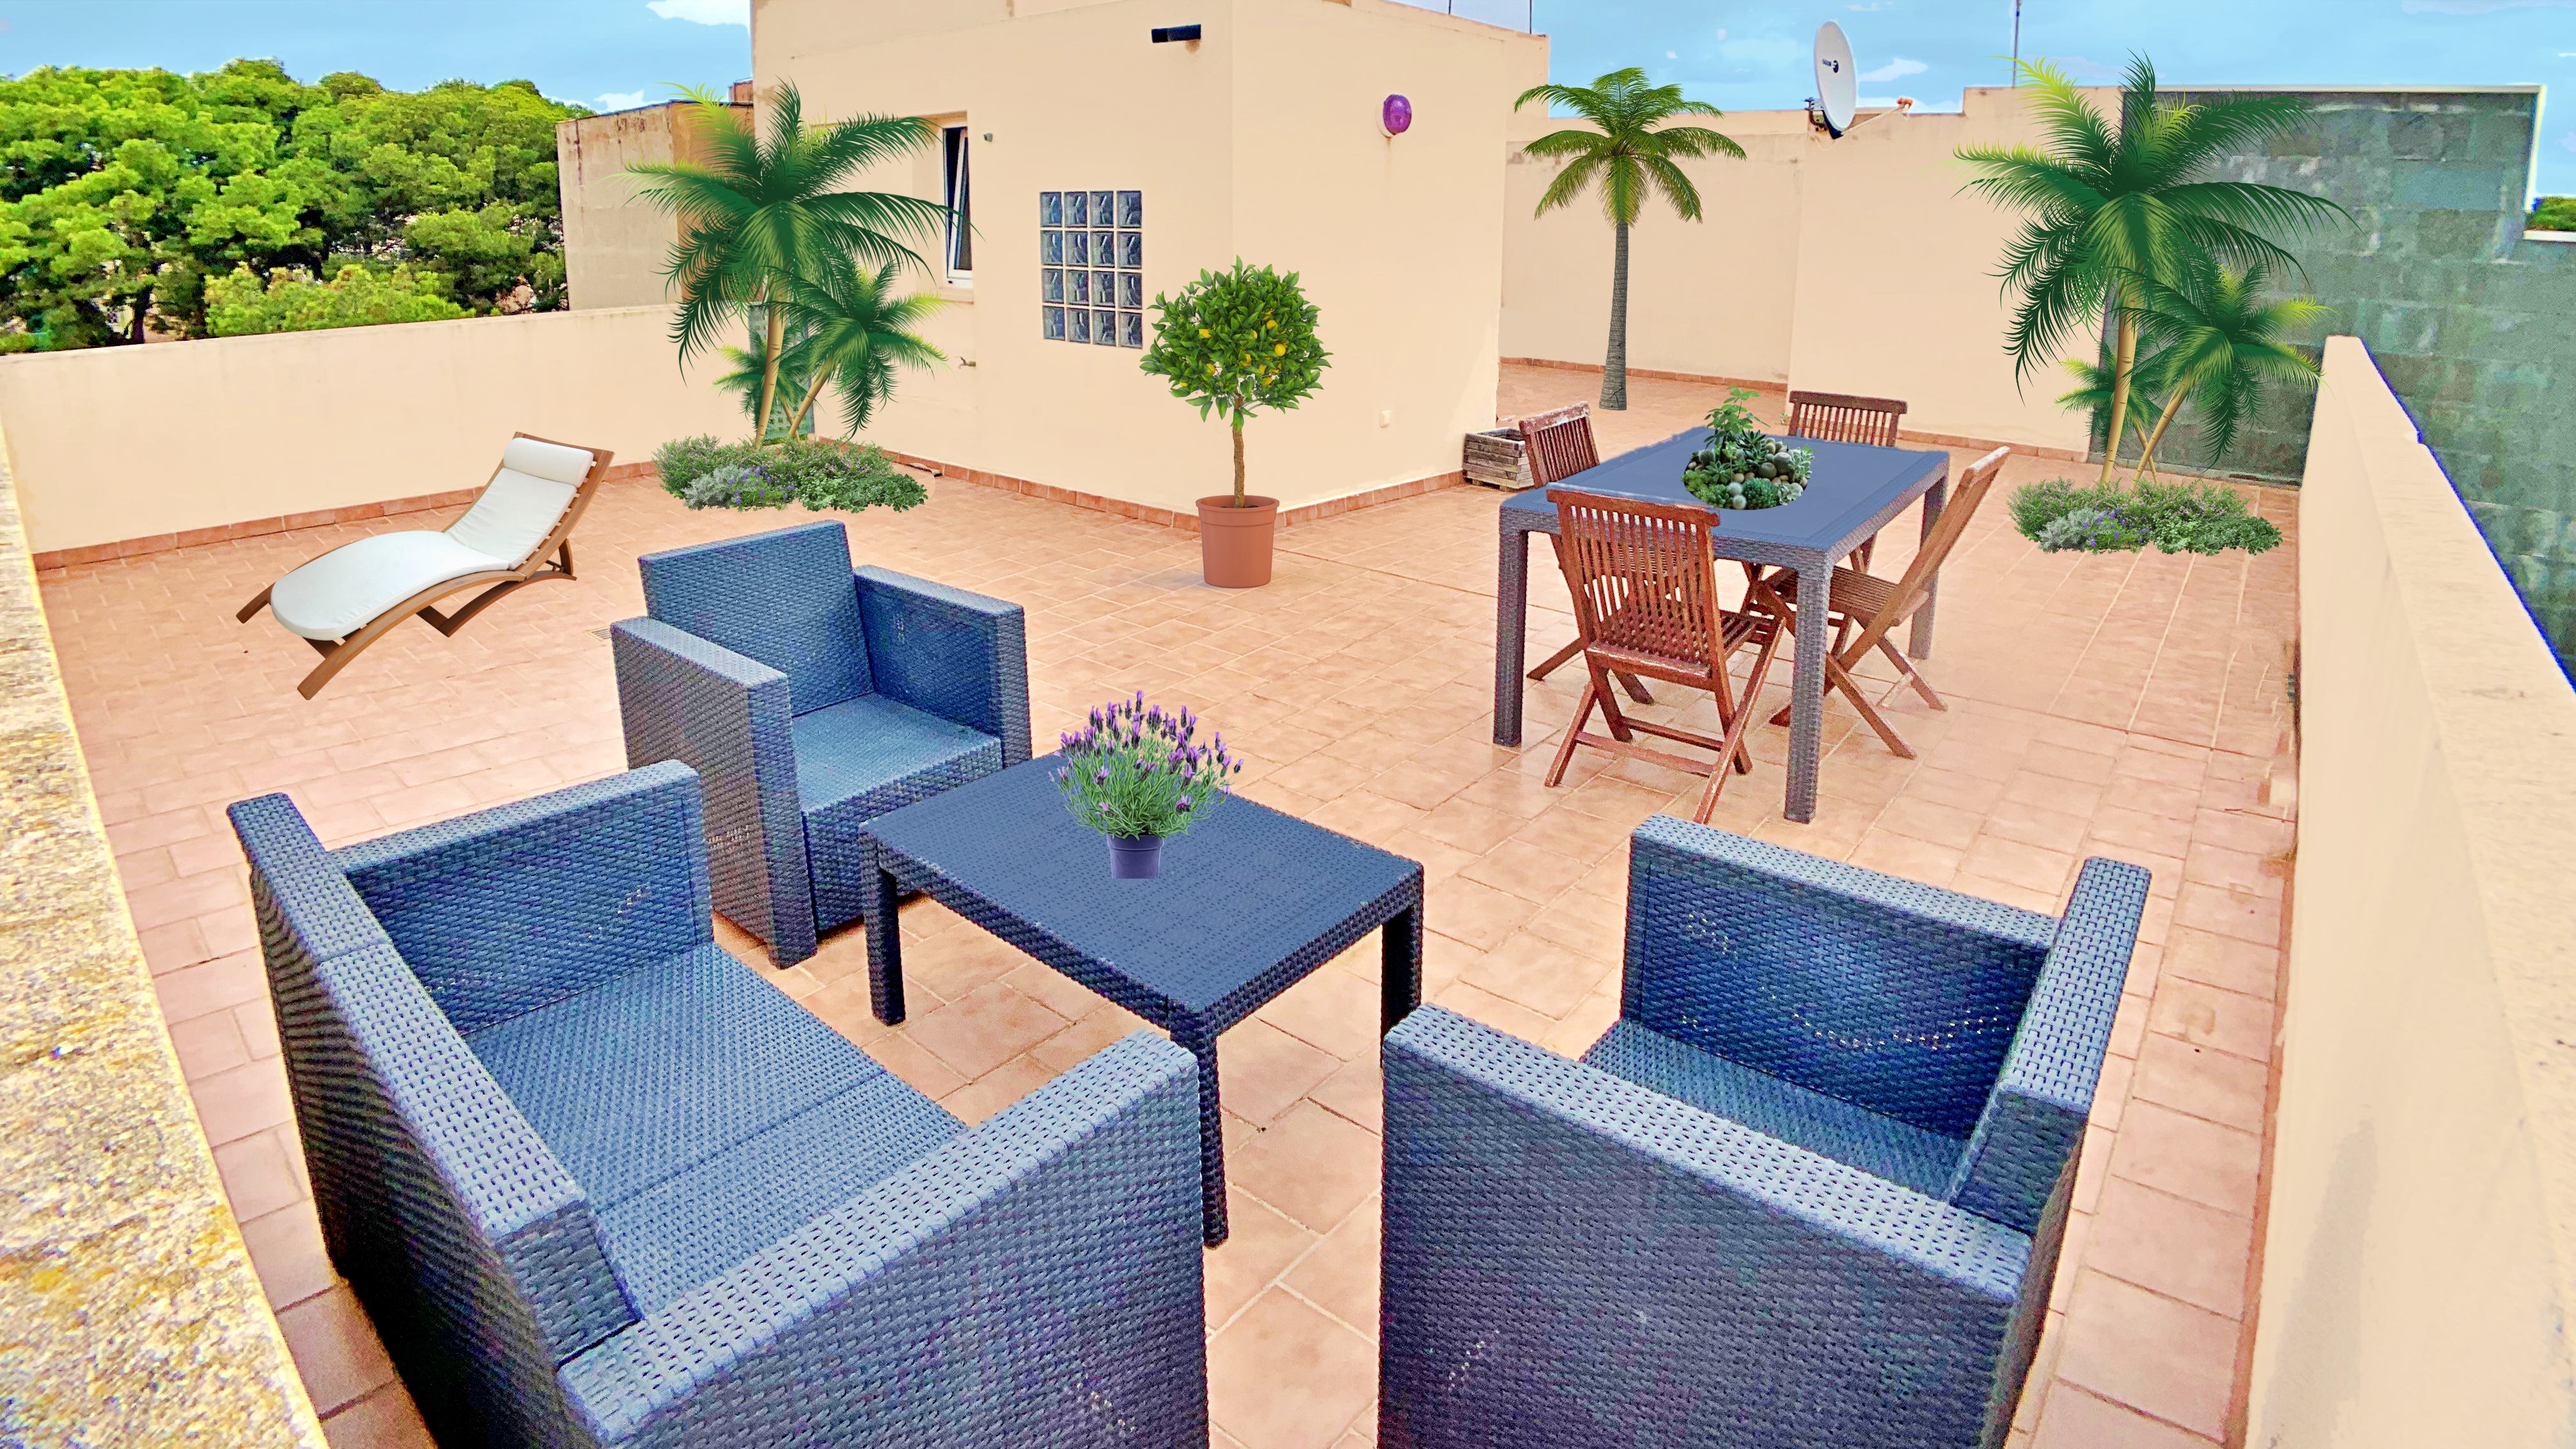 Duplex-Penthouse + (2 parking spaces with storage room) one of the highest in Porto Cristo